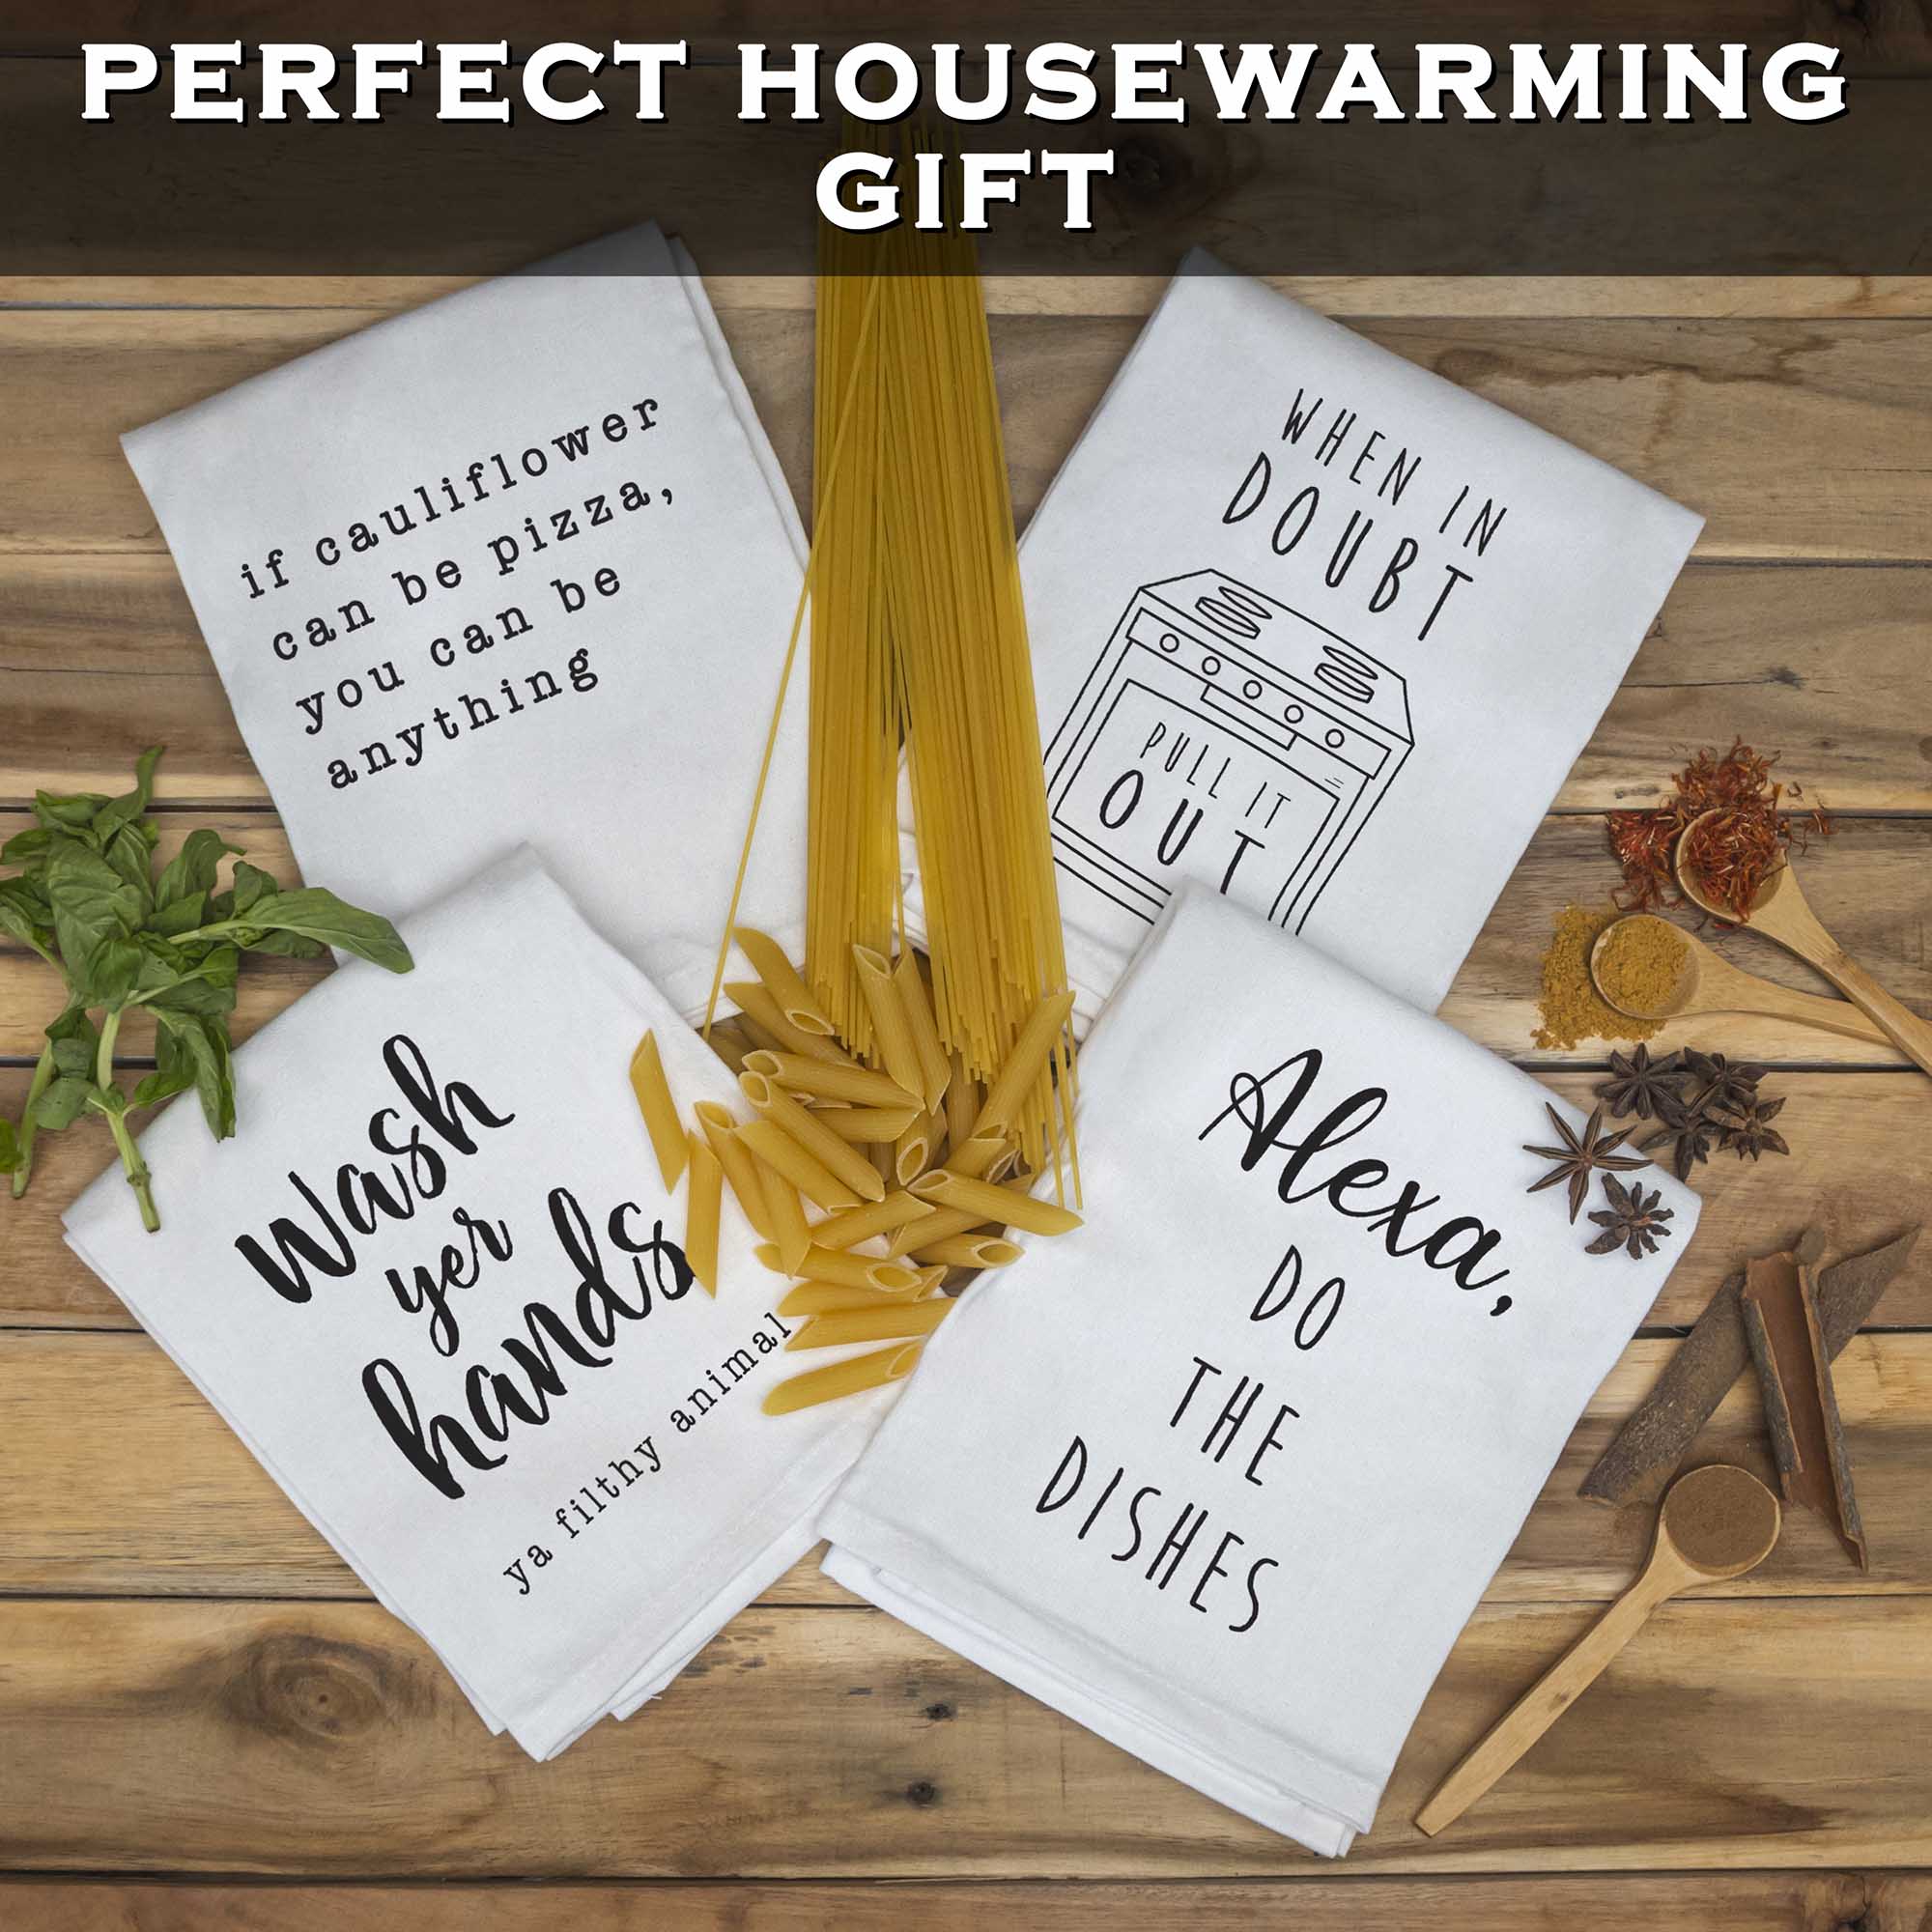 https://maineventusa.shop/cdn/shop/products/towels_LS_4pack_02withtext_funny-kitchen-towel-4-pack-18x24-inch-set-of-4-cute-dish-towel-saying-housewarming-gift-hand-towel-alexa-do-the-dishes-towel.jpg?v=1678897157